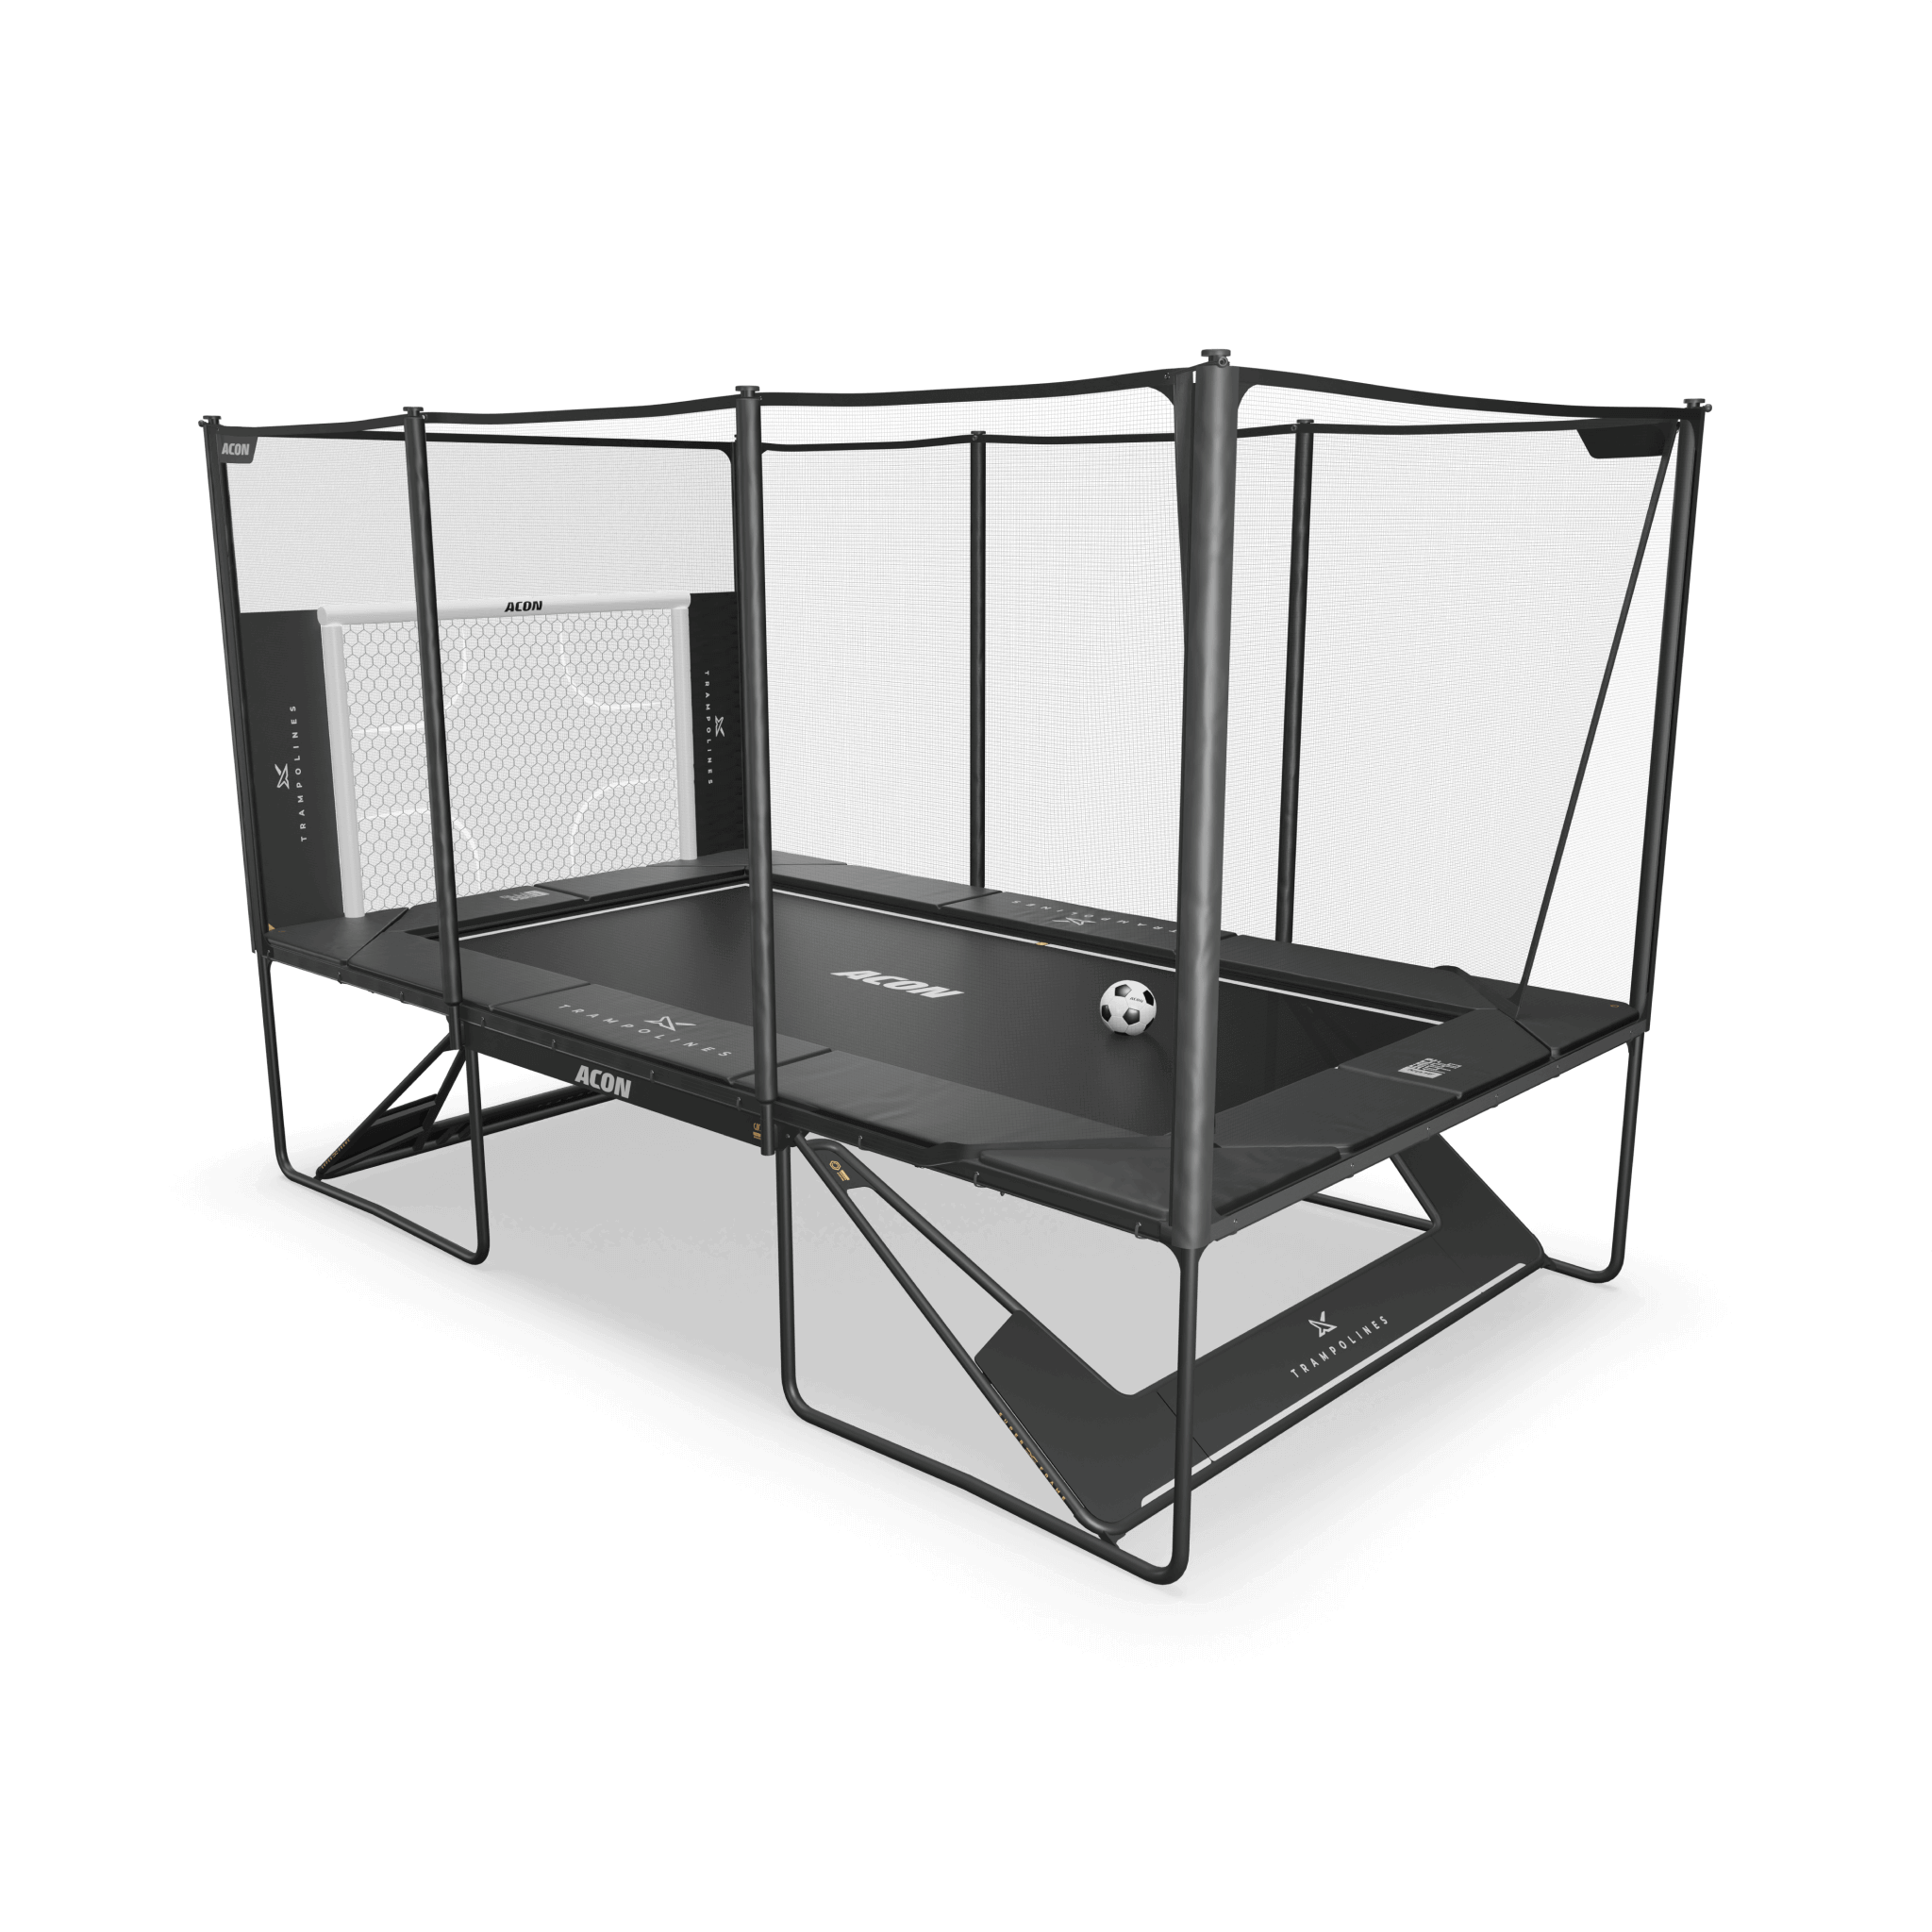 Acon X 17ft Trampoline with soccer goal panel